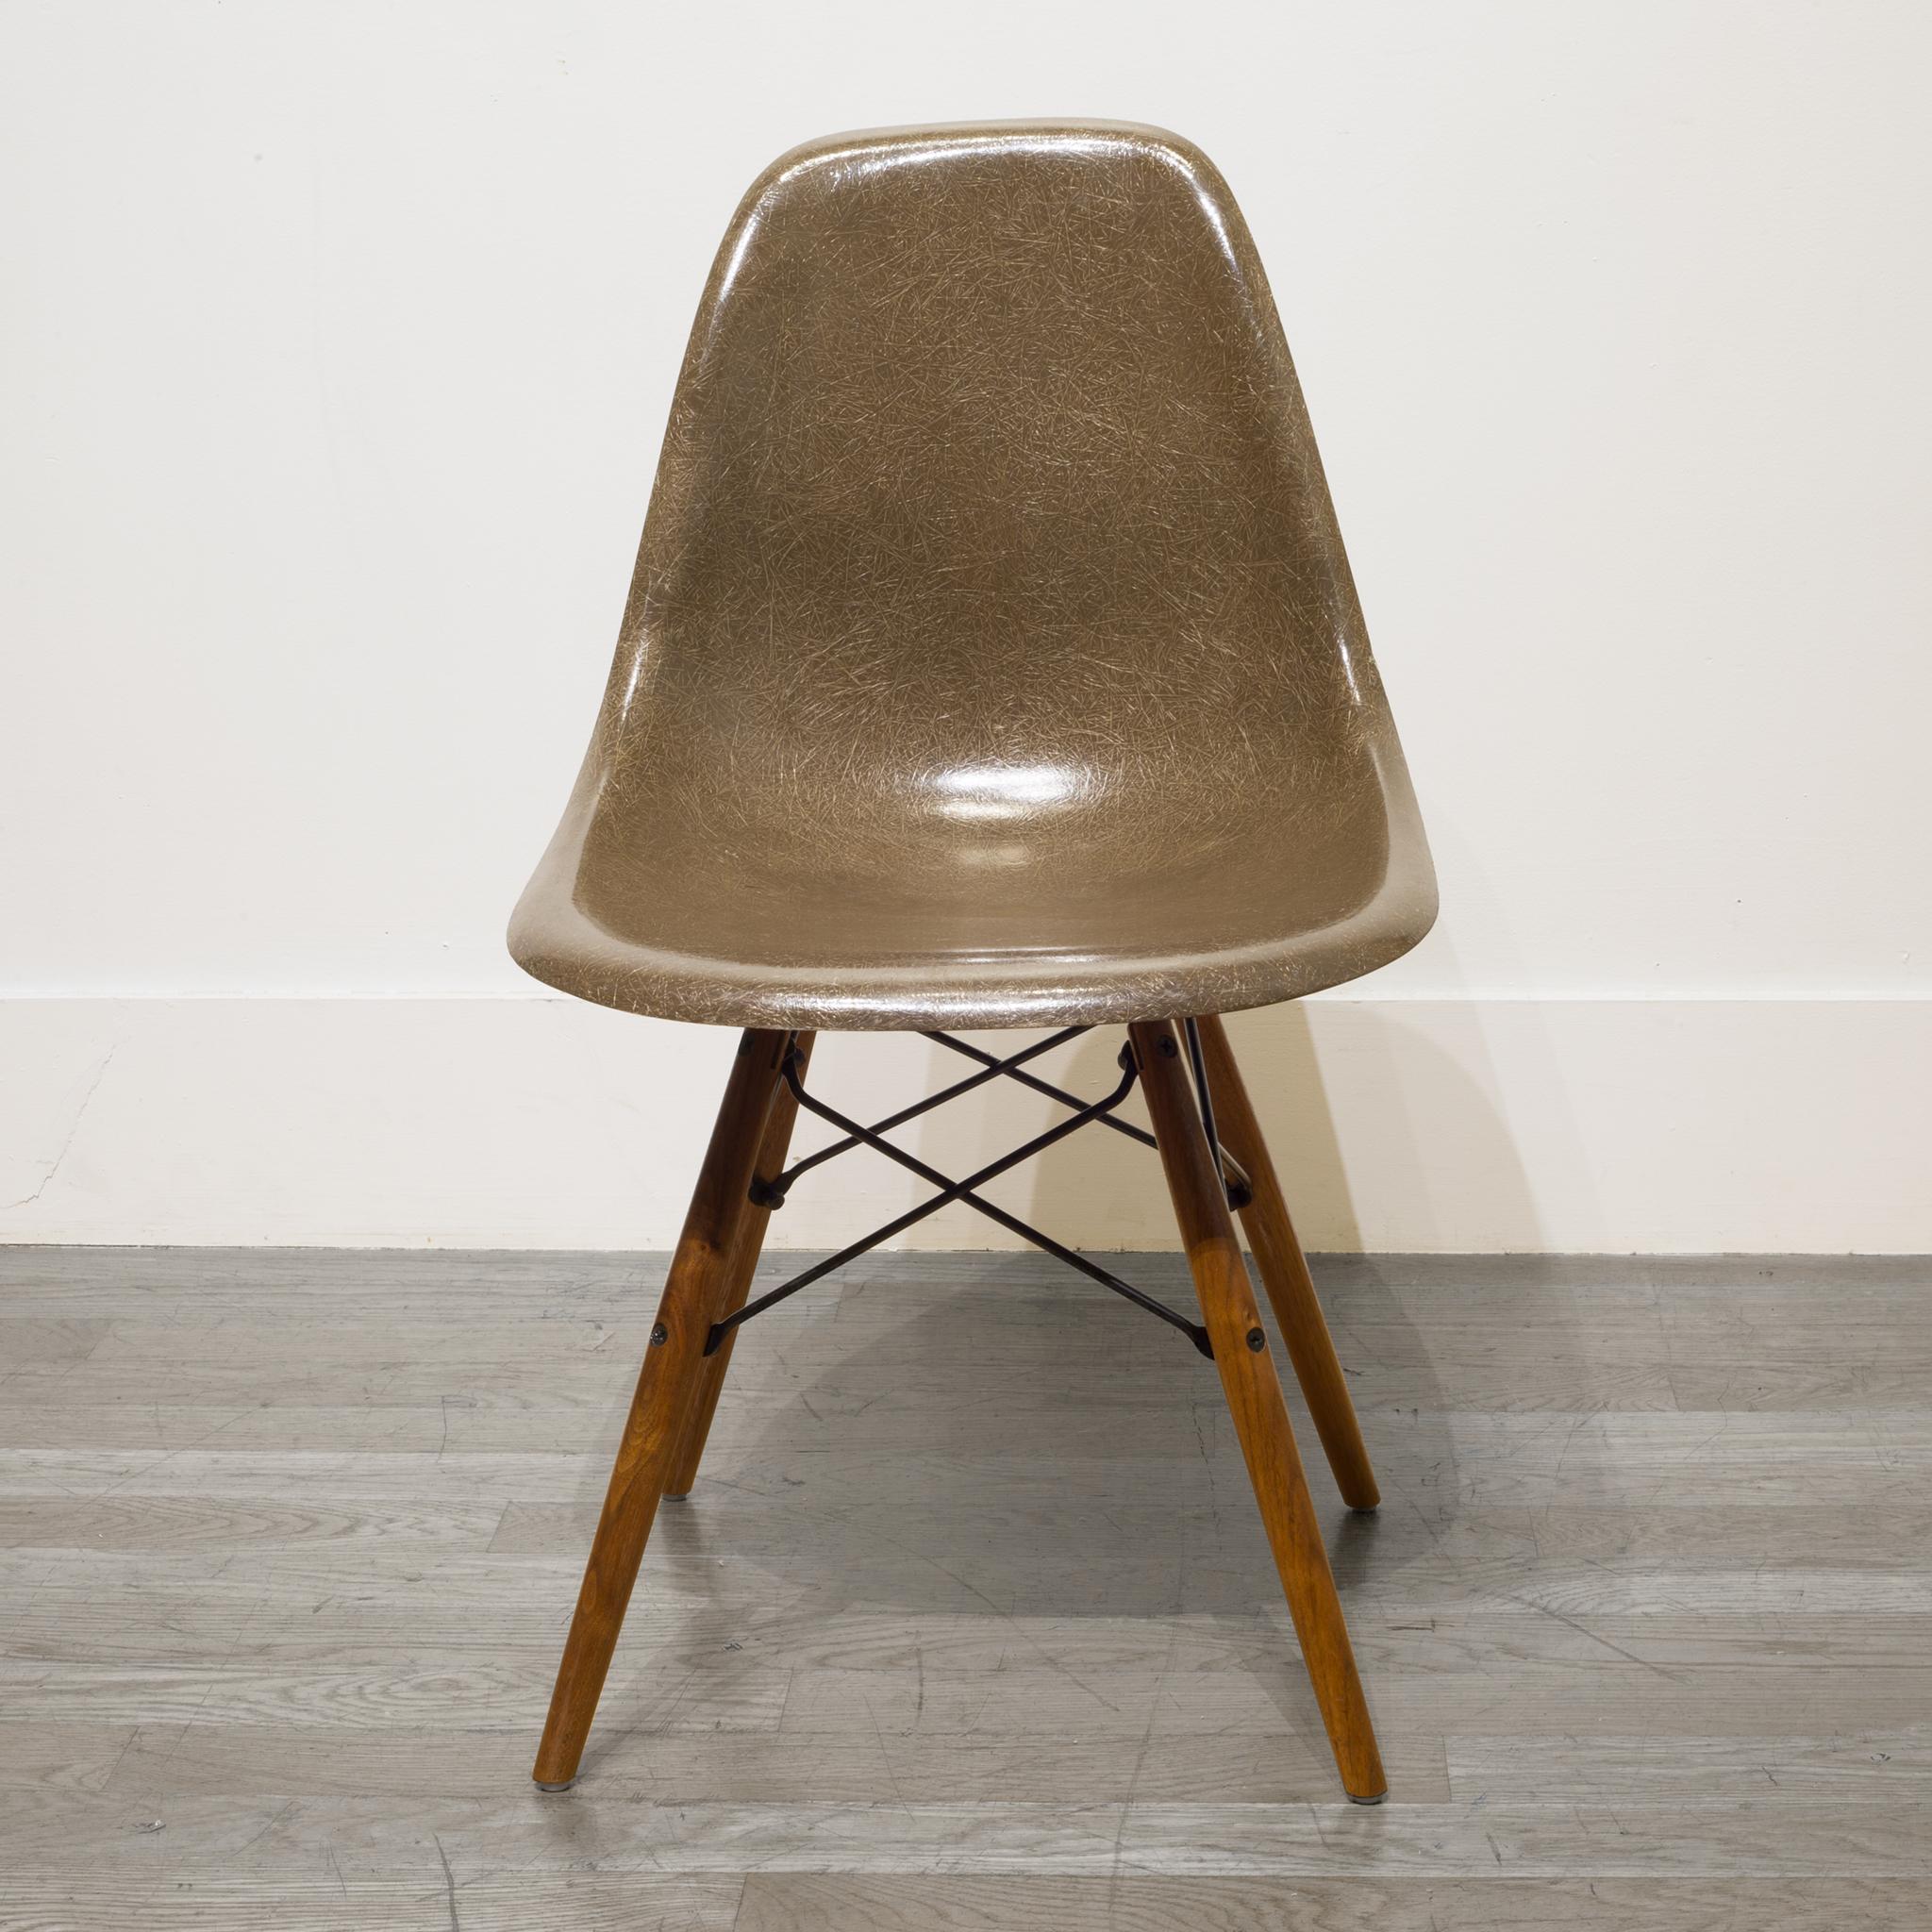 ABOUT

This is an original 1950s Eames fiberglass shell chair with original model sticker in Brown. This iconic chair is mounted on a newer Herman Miller Walnut dowel base. Replacements of the bases are common.

We have a total of 3 shell chairs